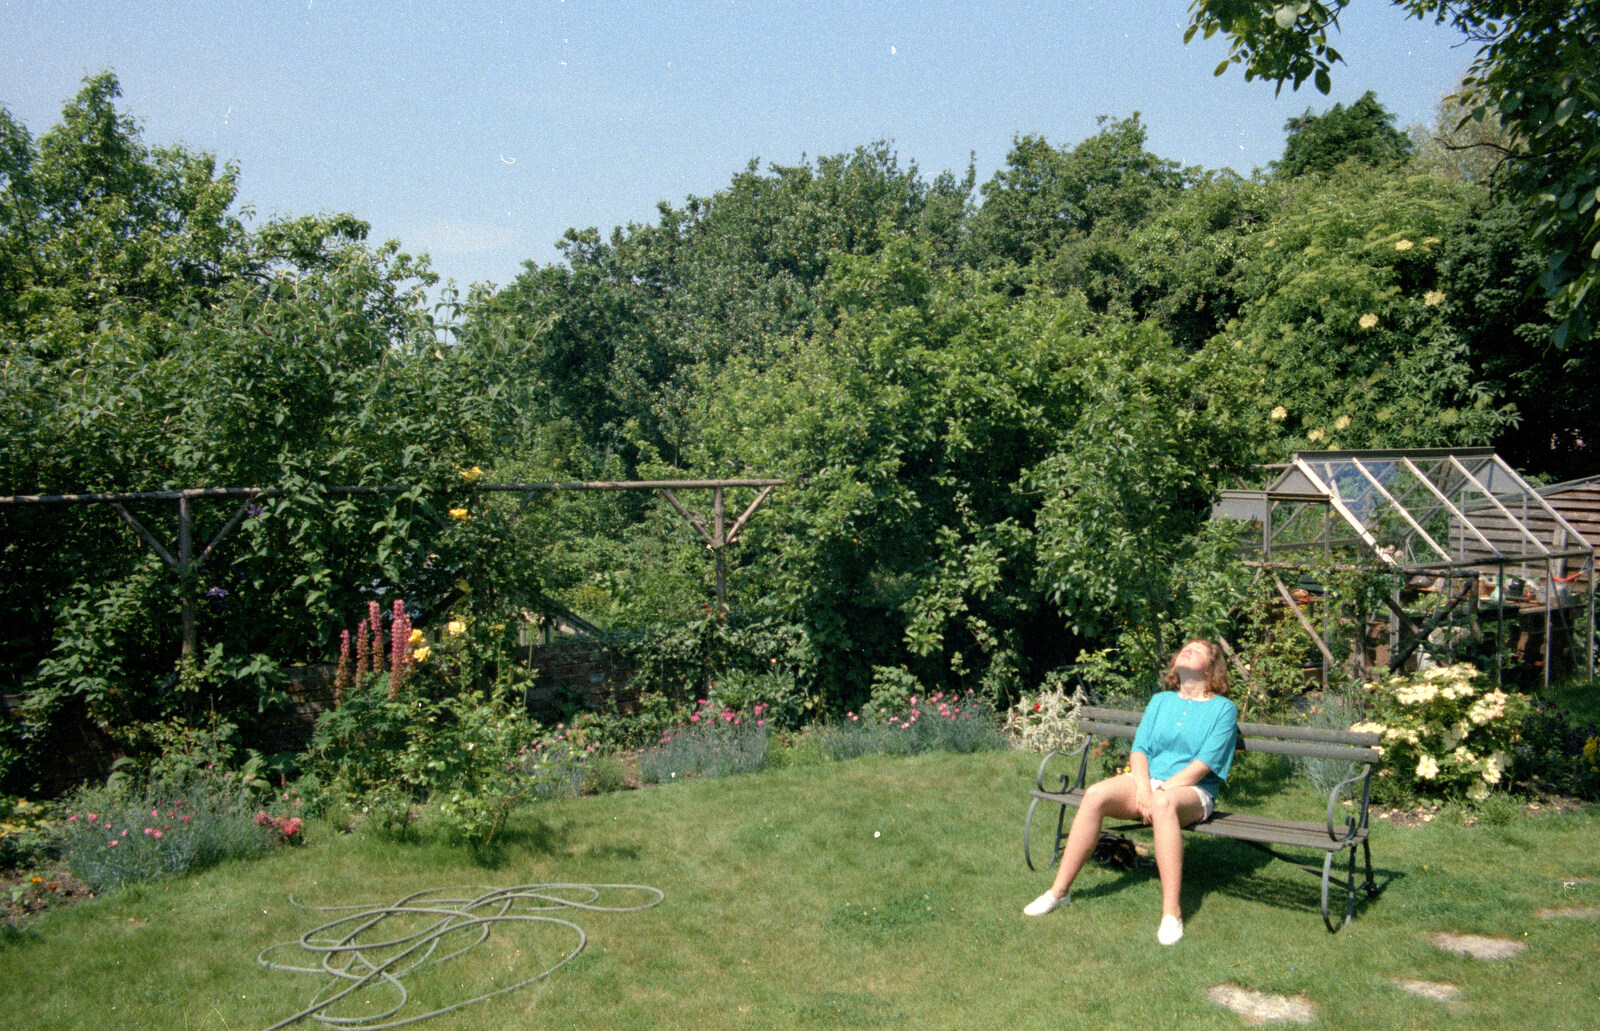 Sis soaks up a few rays of sun from A Ford Cottage Miscellany, Barton on Sea, Hampshire - 7th July 1986